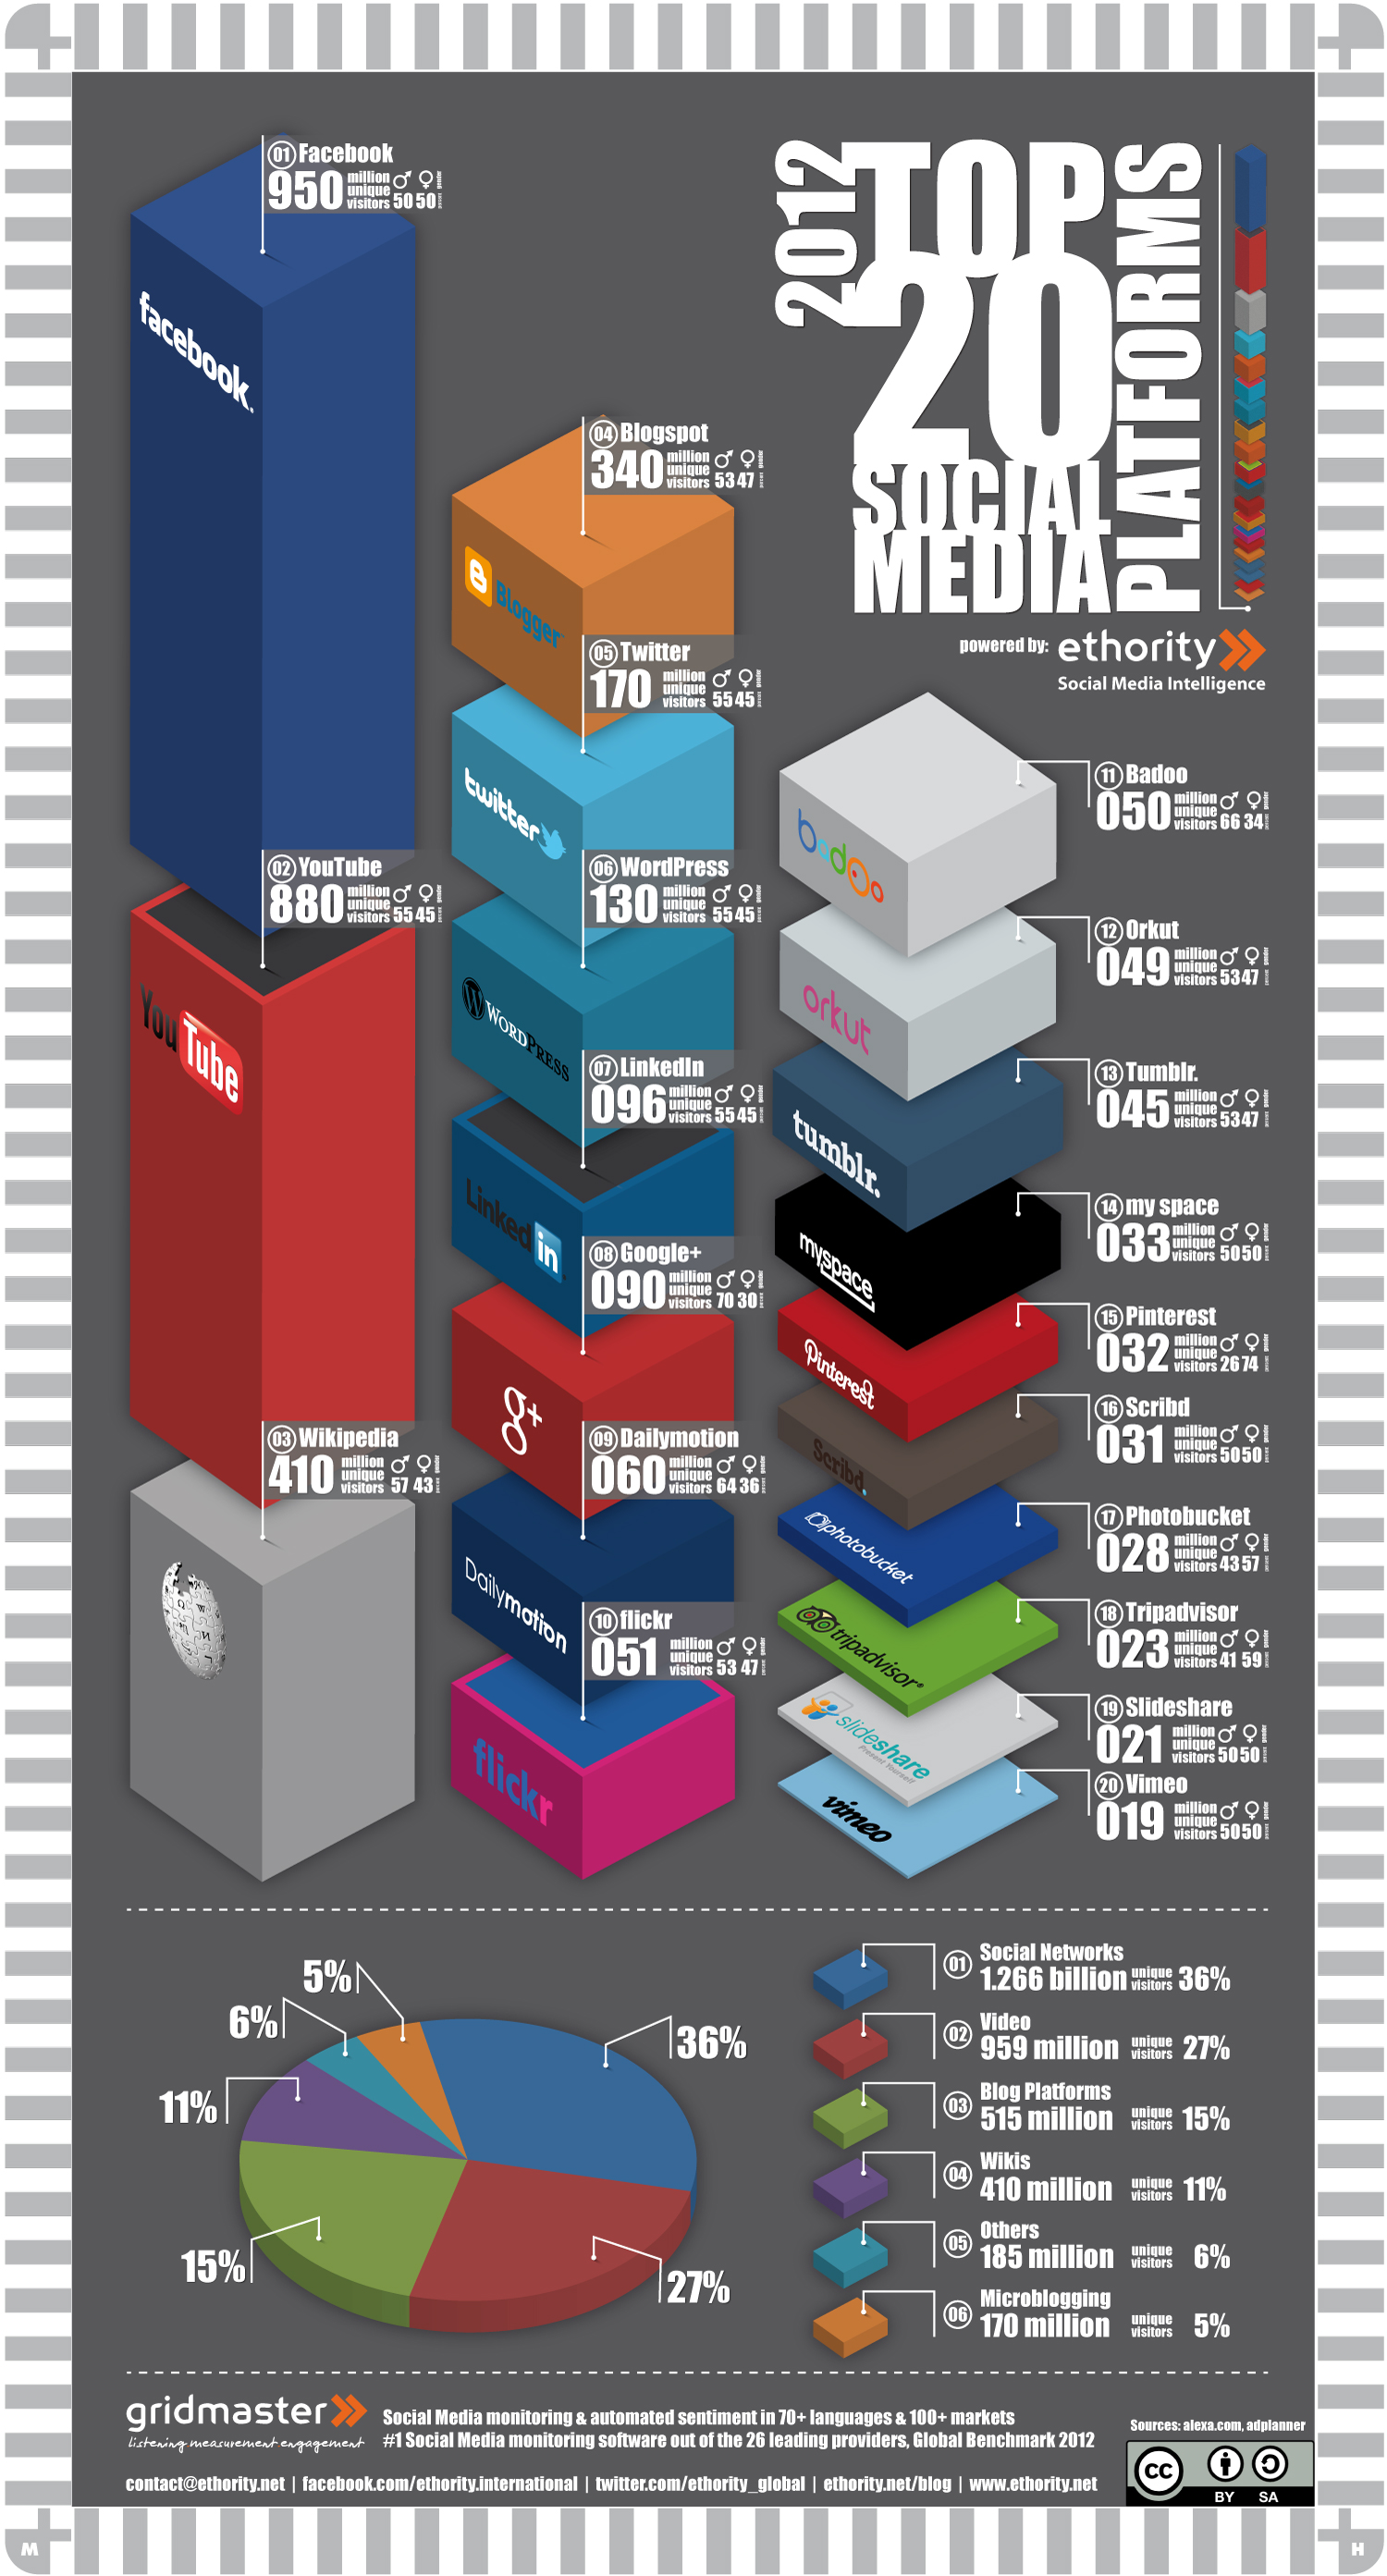 Social_Media_Top_20_sites_2012_infographic